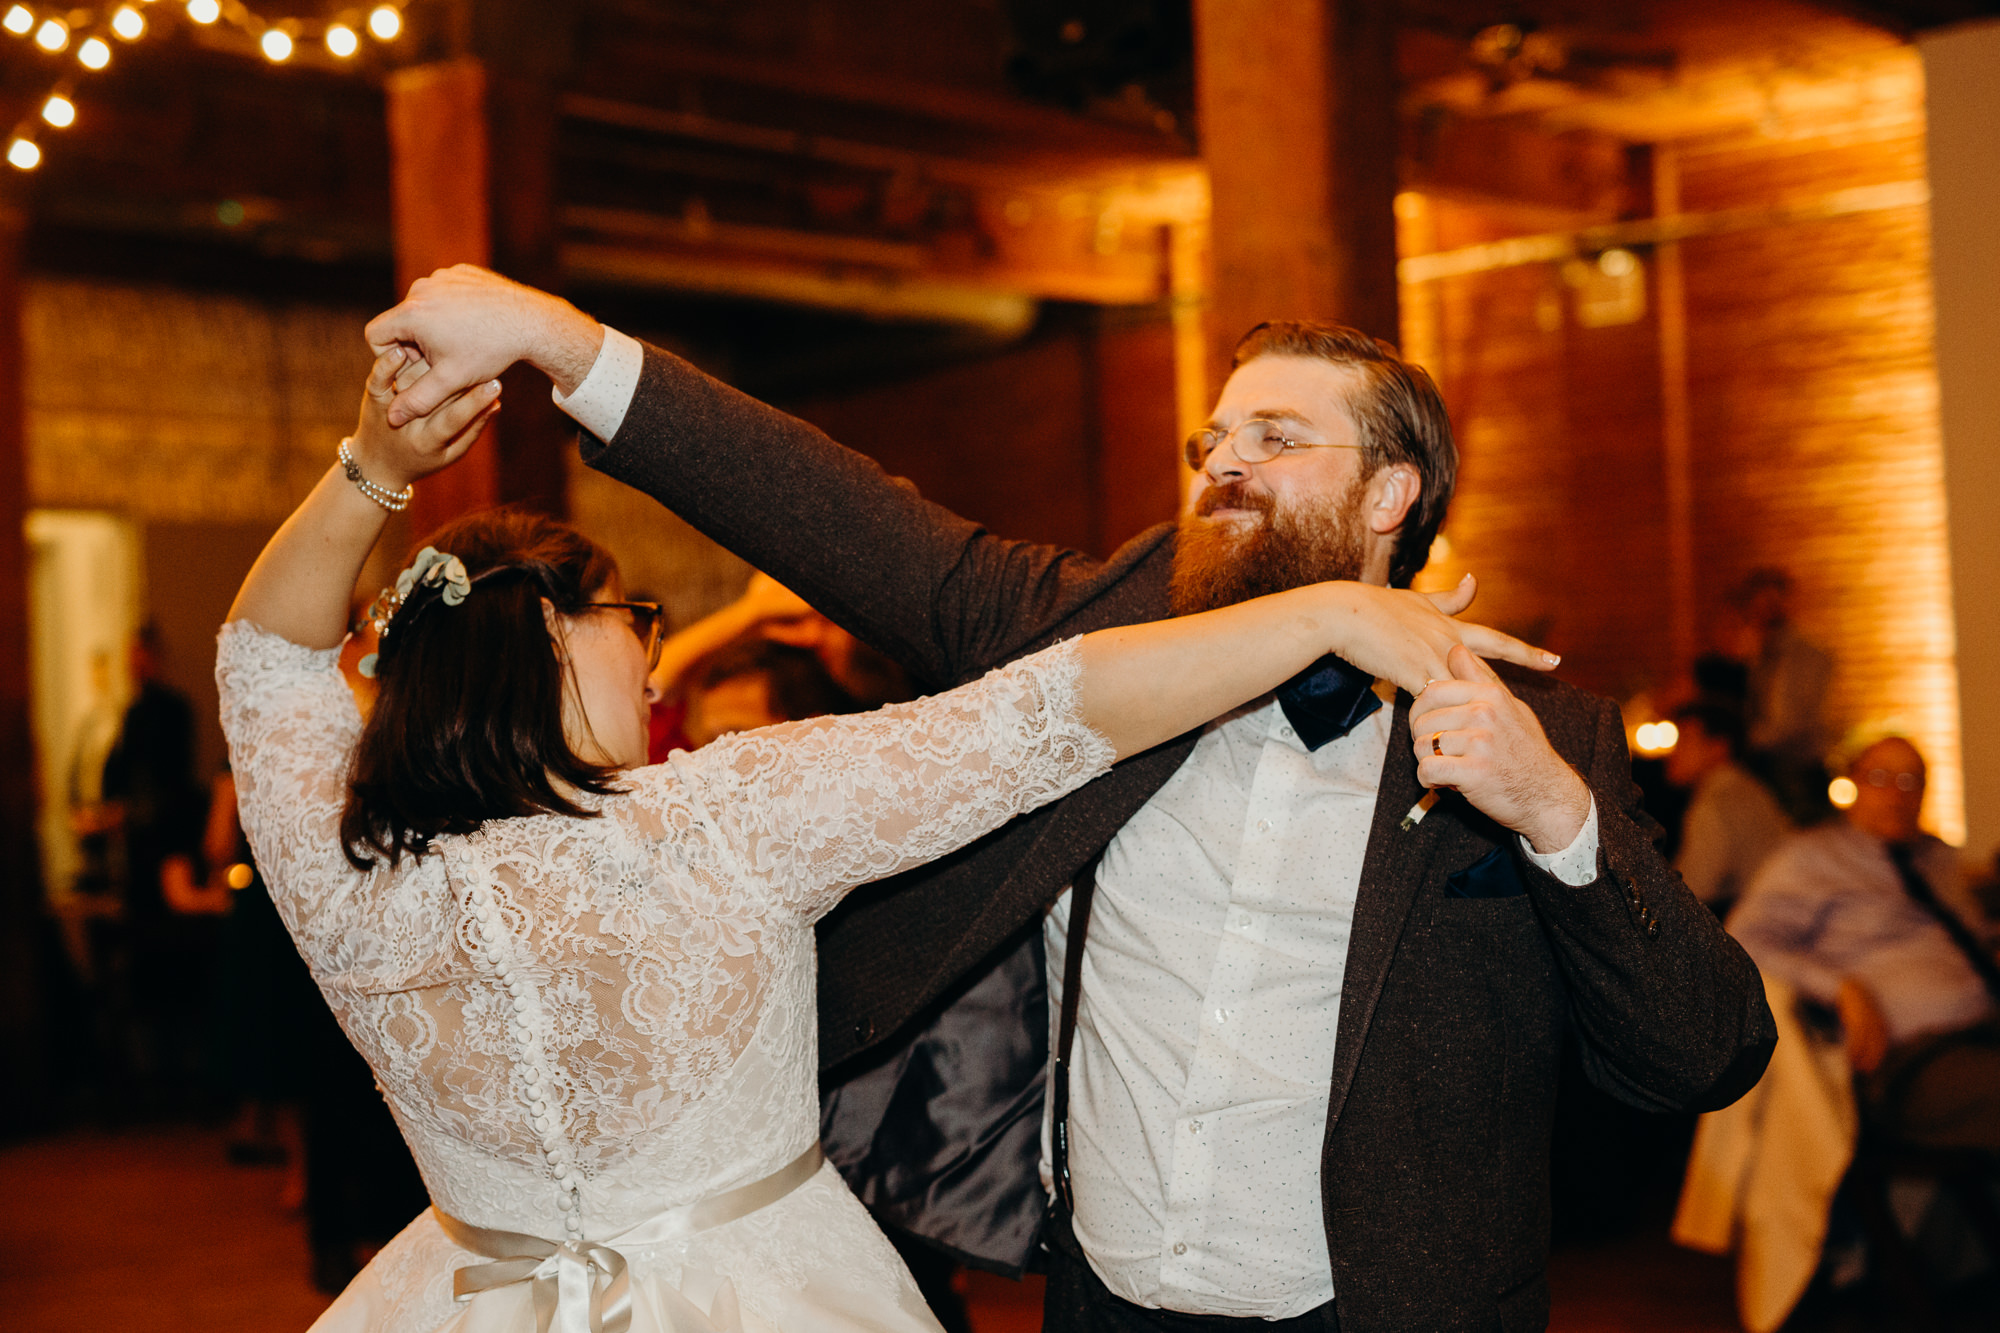 a bride and groom dance together during their wedding reception at dumbo loft in brooklyn, ny